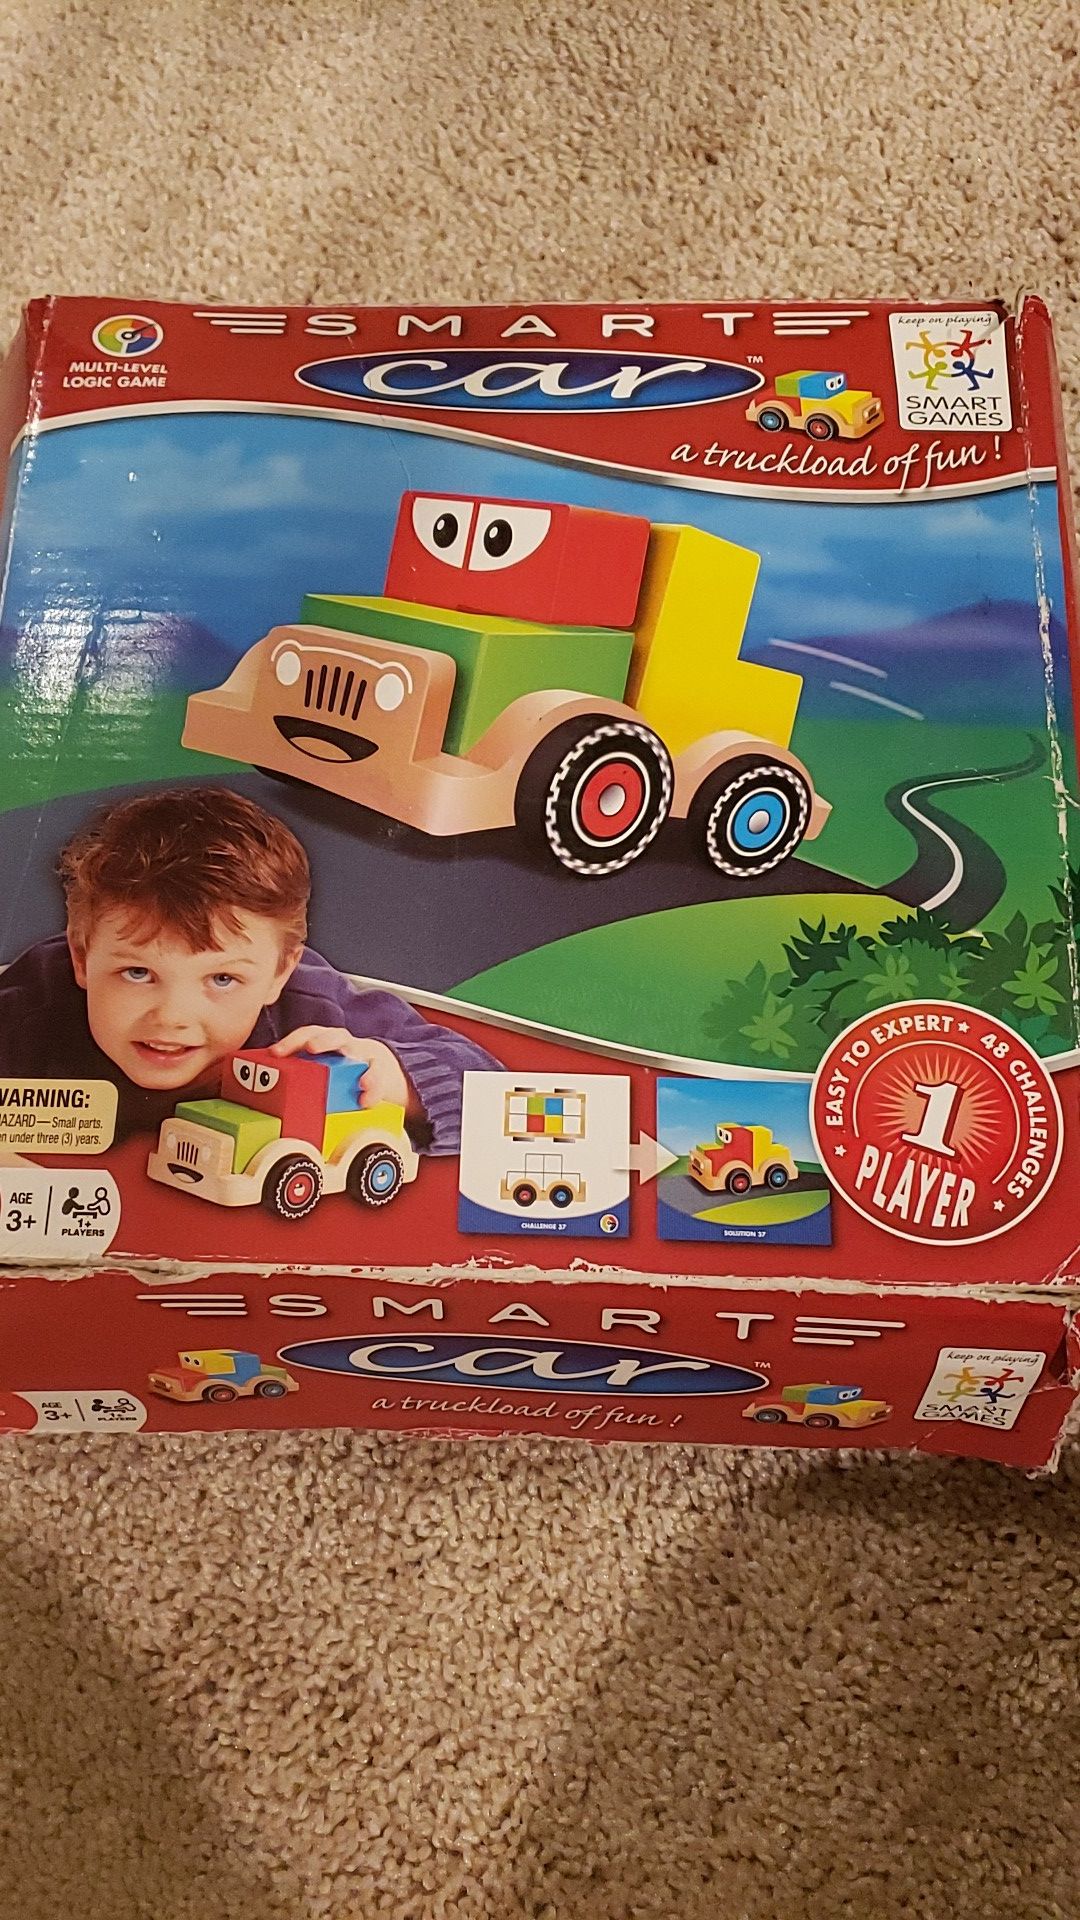 Smart games strategy game - cars